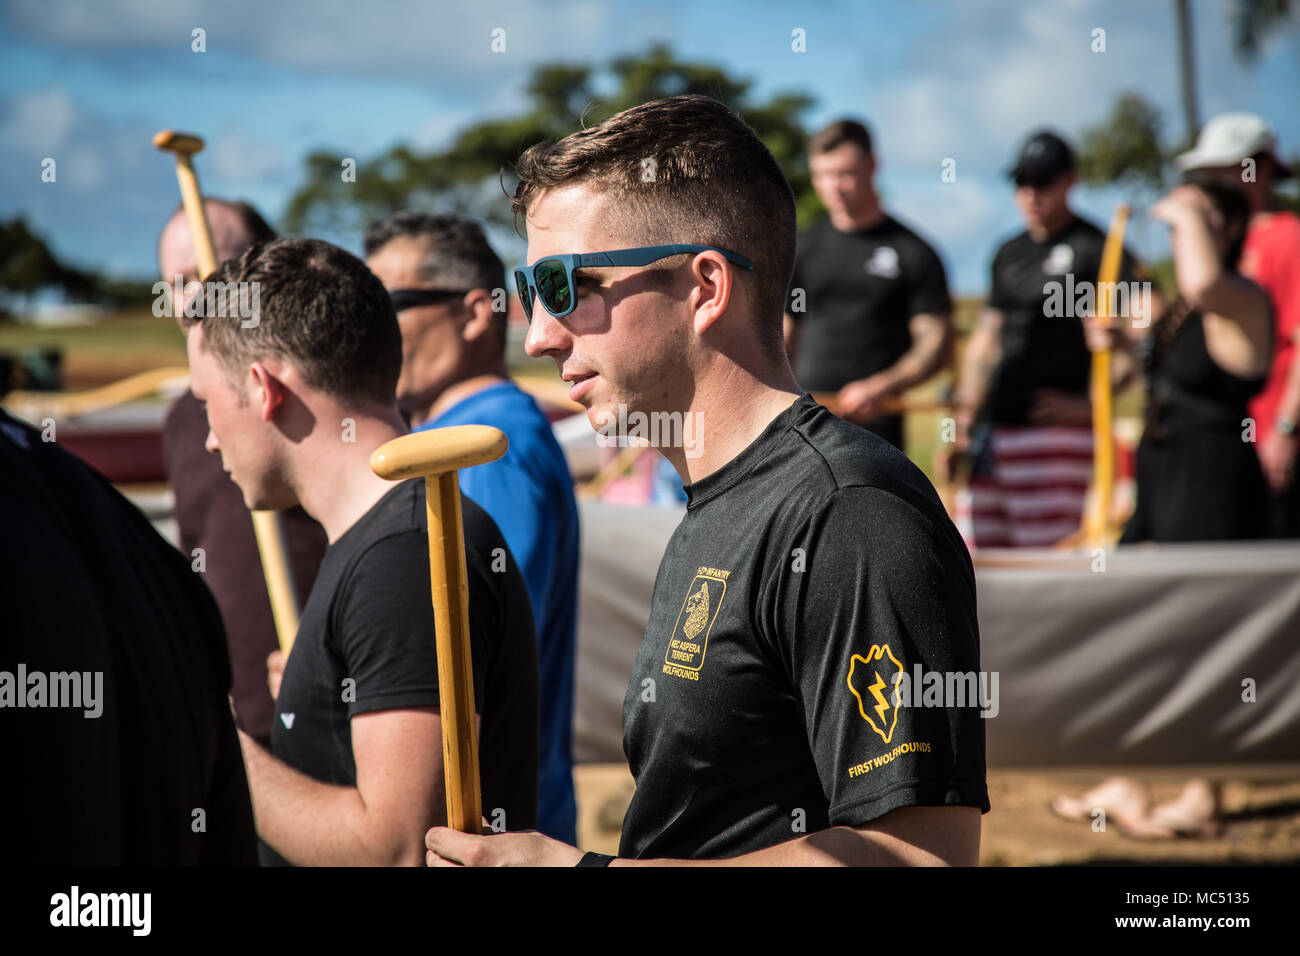 U.S. Army 2nd. Lt. Weston Iannone, assigned to 1st Battalion, 27th Infantry Regiment, 2nd Infantry Brigade Combat Team, 25th Infantry Division listens to paddle instruction before the start of the team-building exercise in Keehi Lagoon, Honolulu, Hi., Jan. 30, 2018. In an effort to strengthen international relationships, United States Army Pacific hosted personnel from the British Army to participate in a team building exercise facilitating outrigger canoeing. (U.S. Army photo by 1st. Lt. Ryan DeBooy) Stock Photo